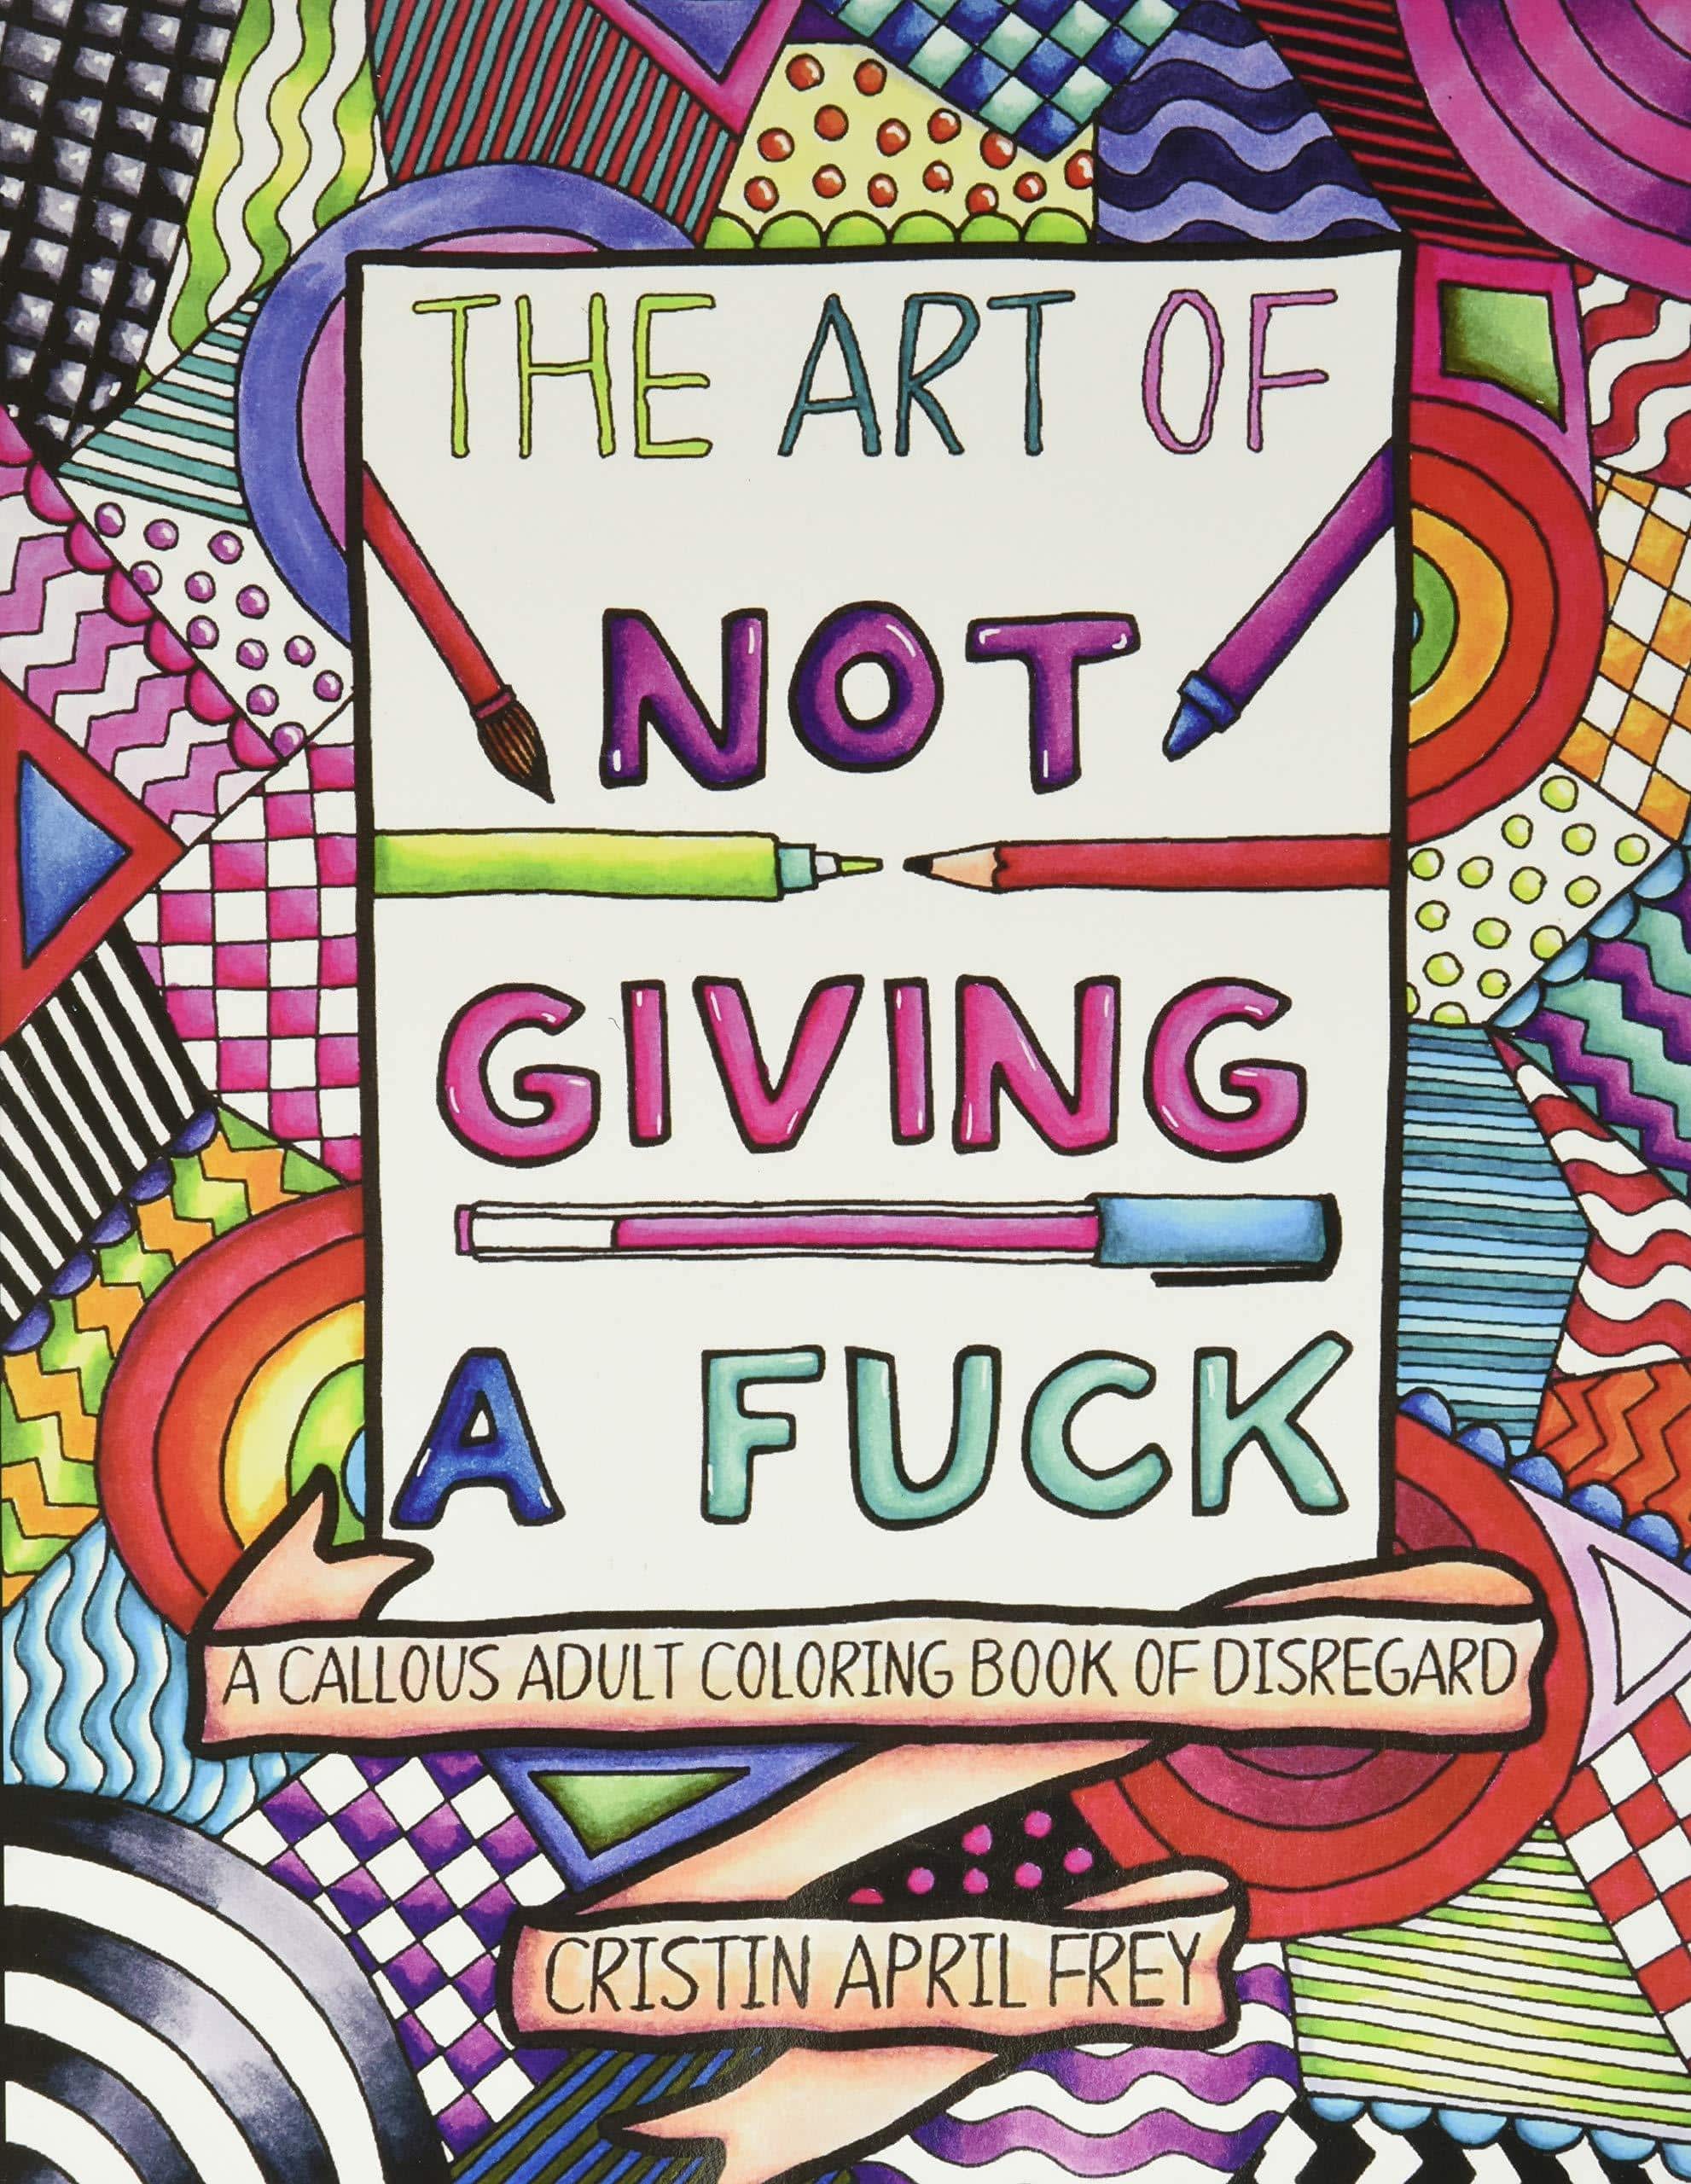 Art of Not Giving a Fuck: A Callous Adult Coloring Book of Disre - SureShot Books Publishing LLC